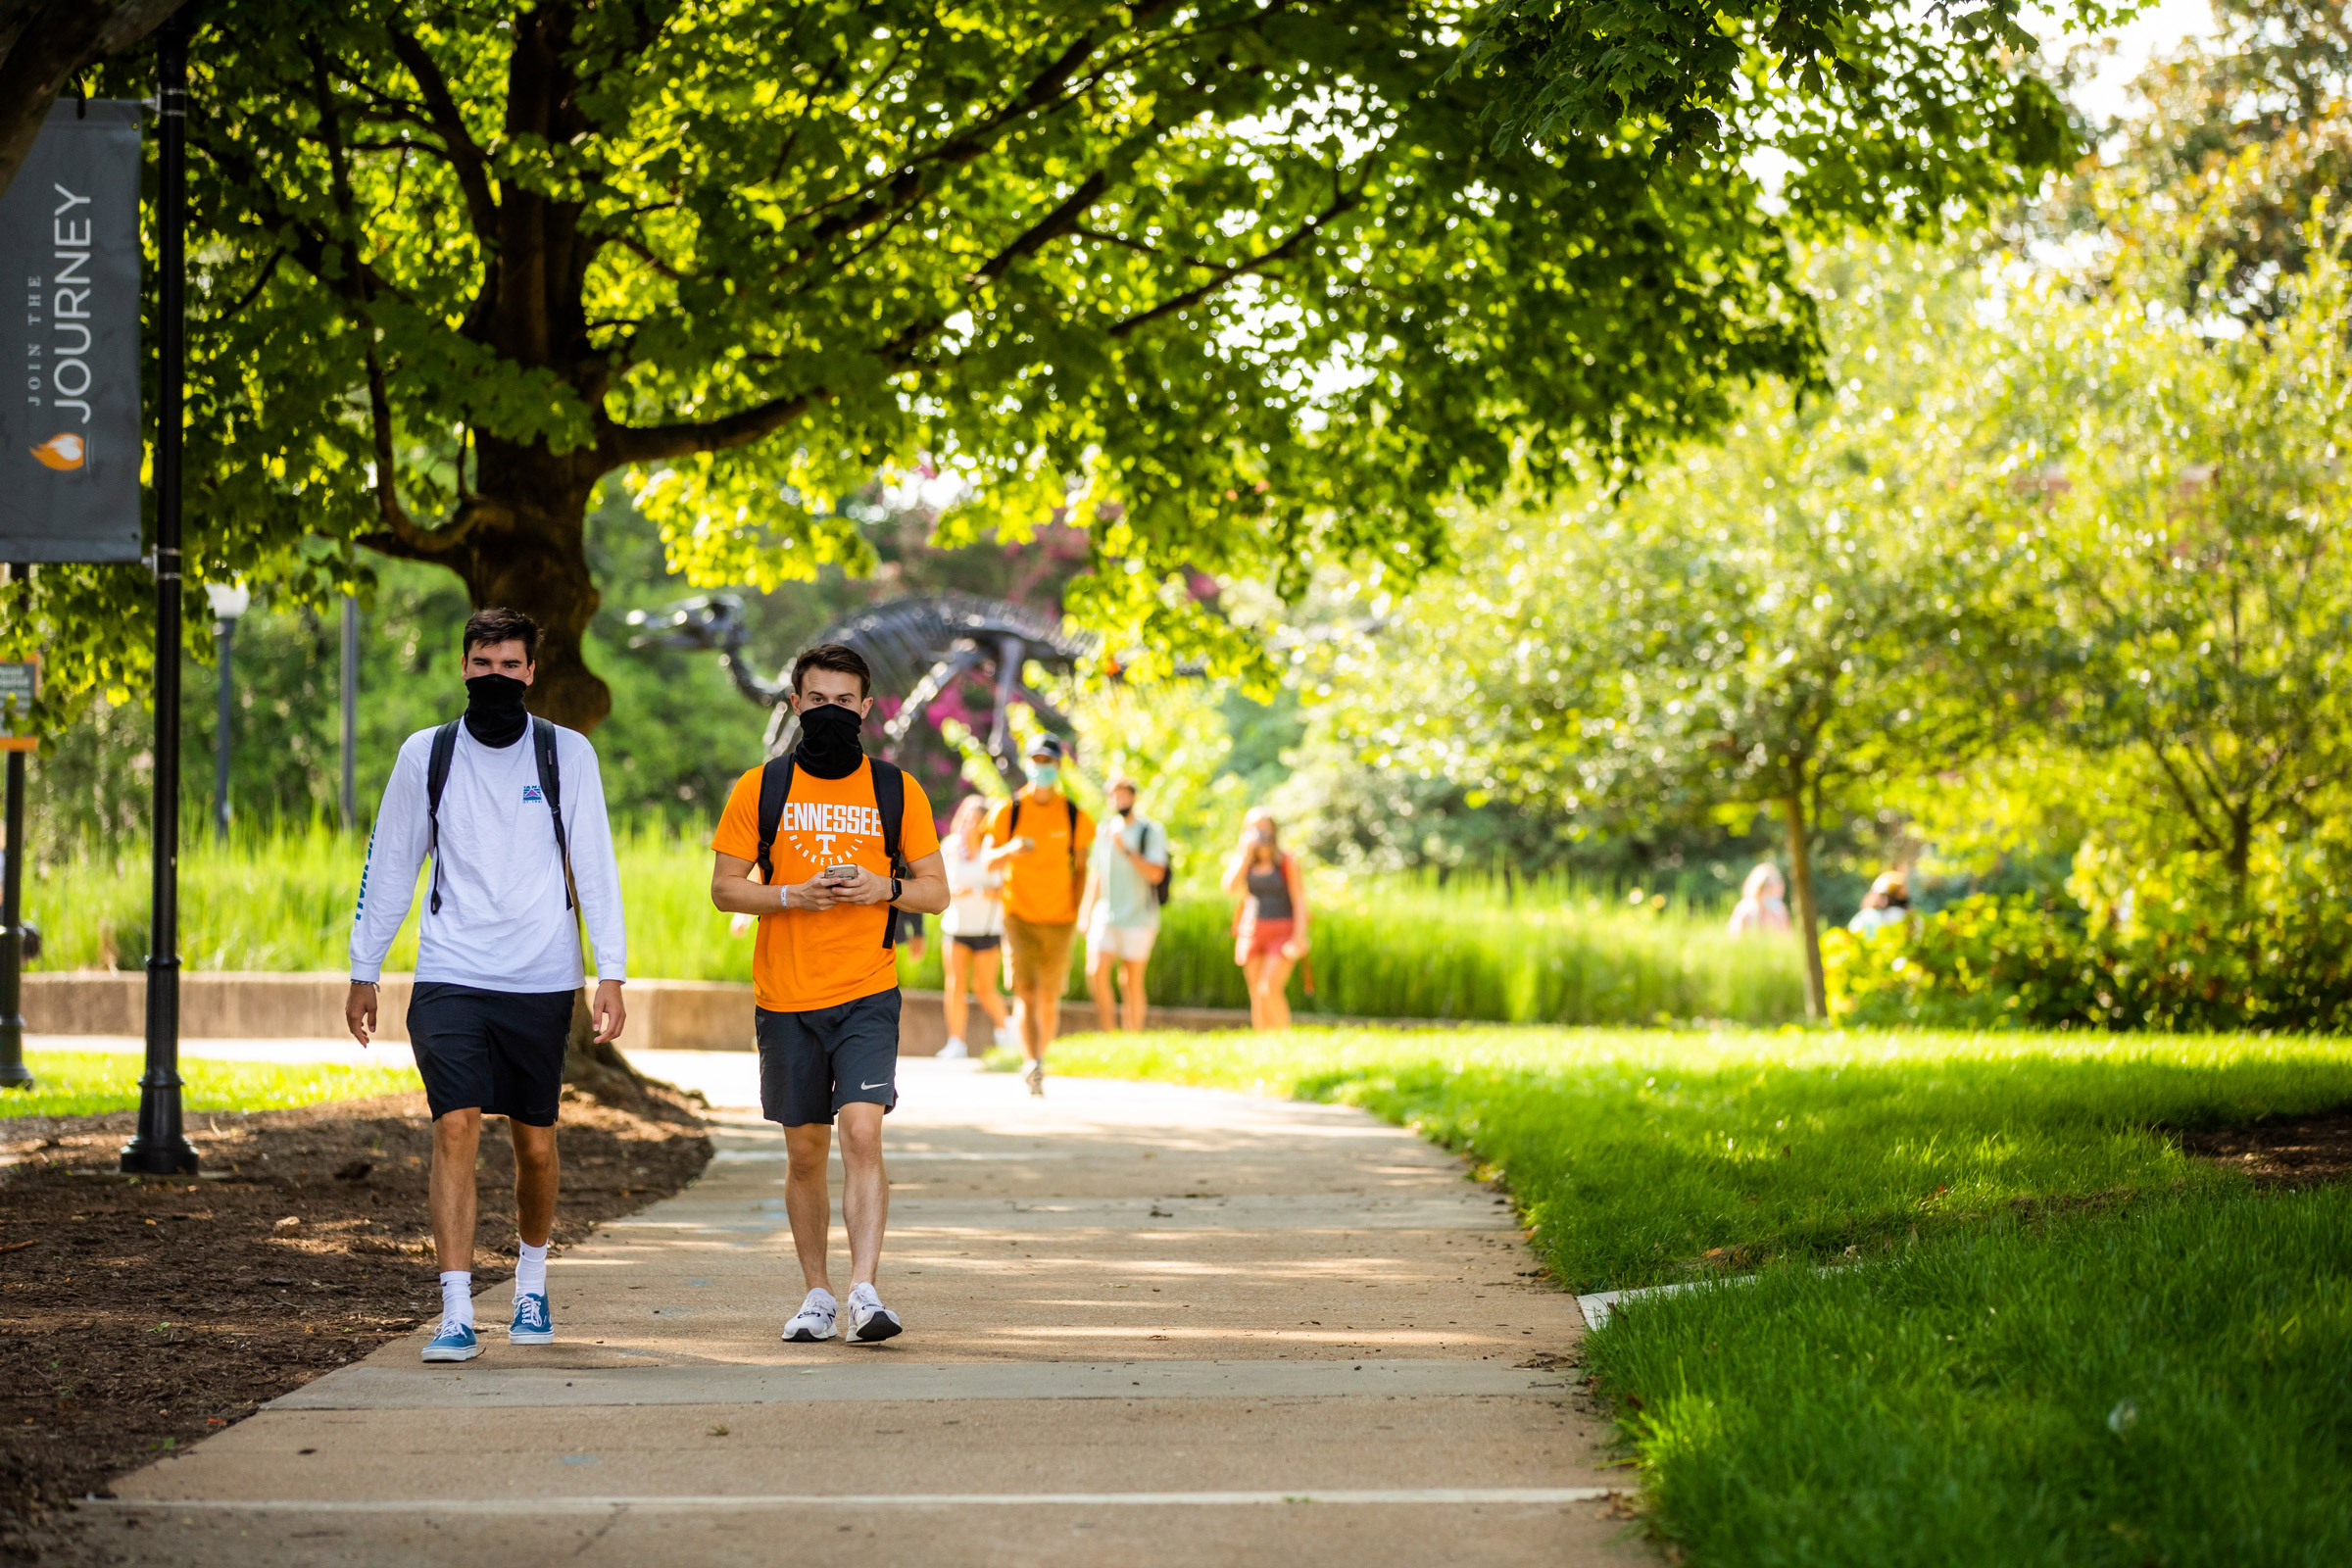 Two young men walk through Circle Park on their way to the Communication or Student Services Building